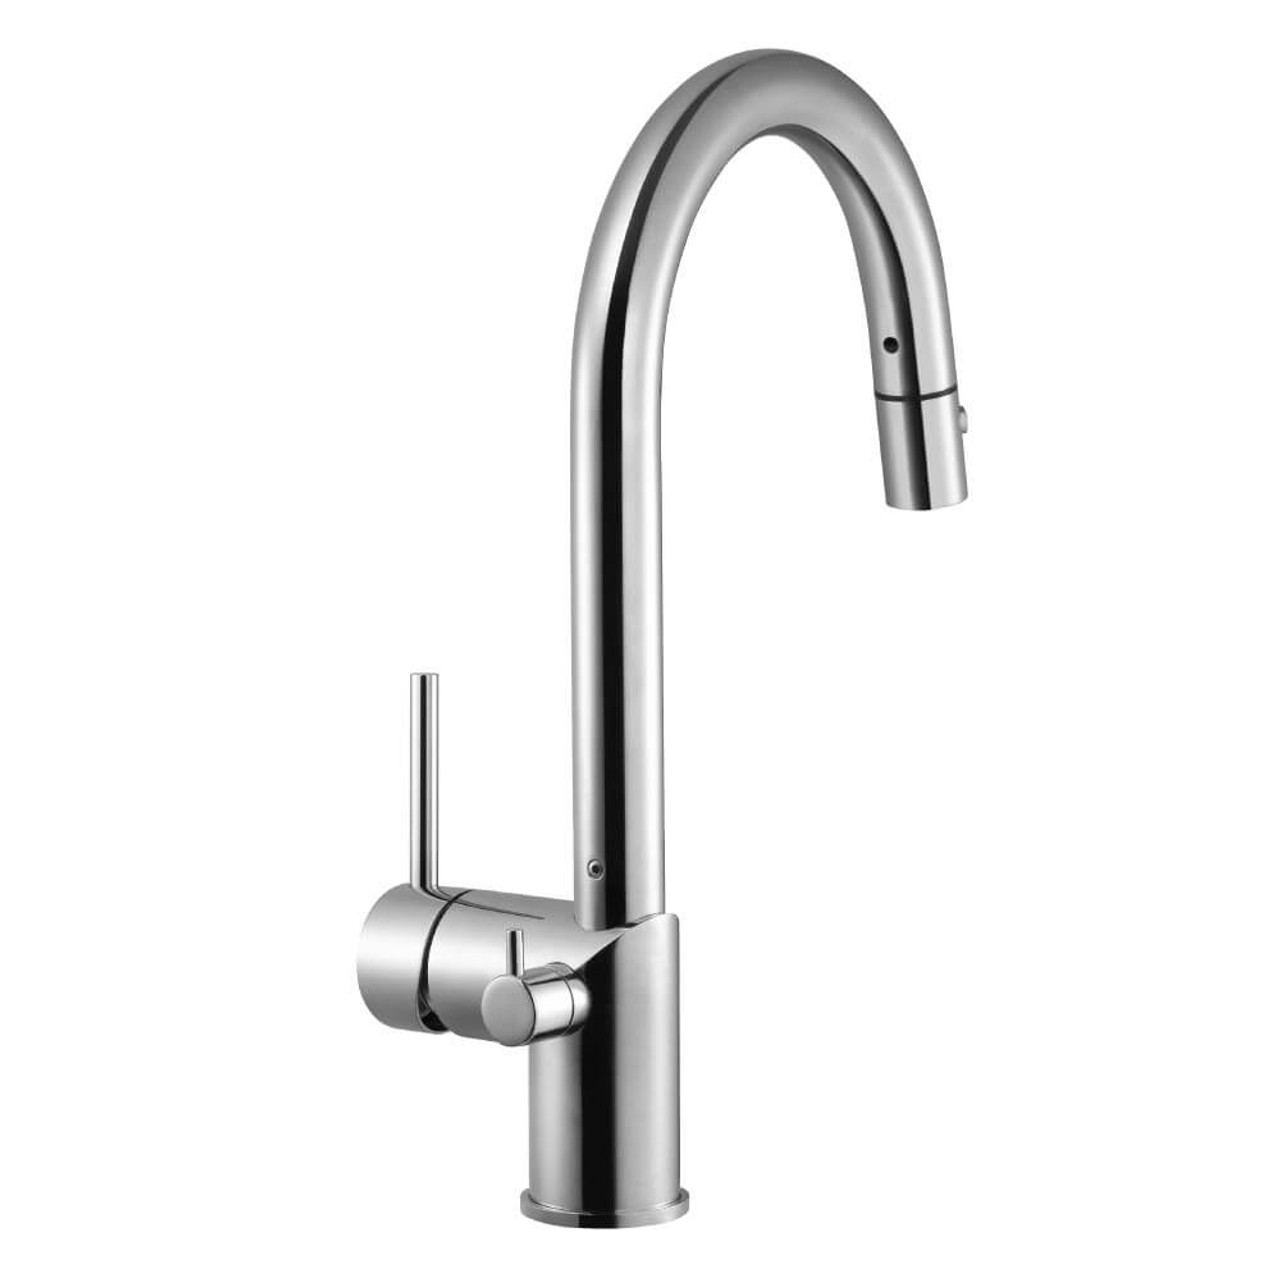 ZEN by Cersanit deck-mounted pull-out washbasin faucet chrome (S), where to buy - Cersanit